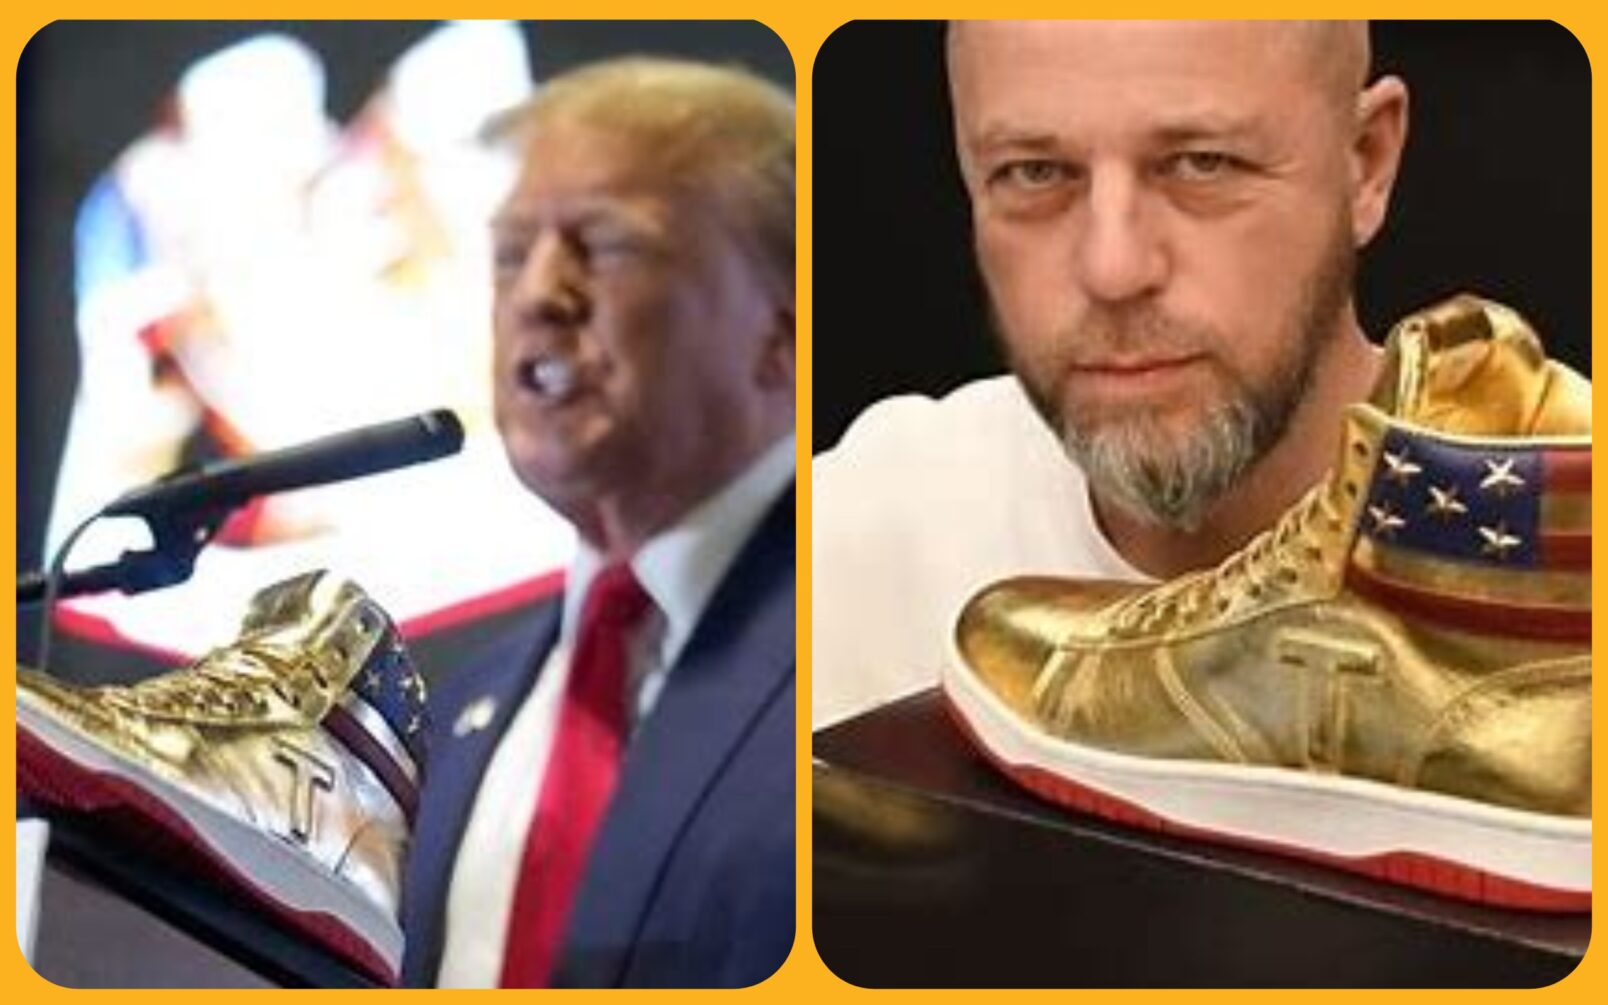 ‘Sneakerhead’ who paid $9K for Trump-signed pair of golden shoes invited to Mar-a-Lago to meet ex-prez